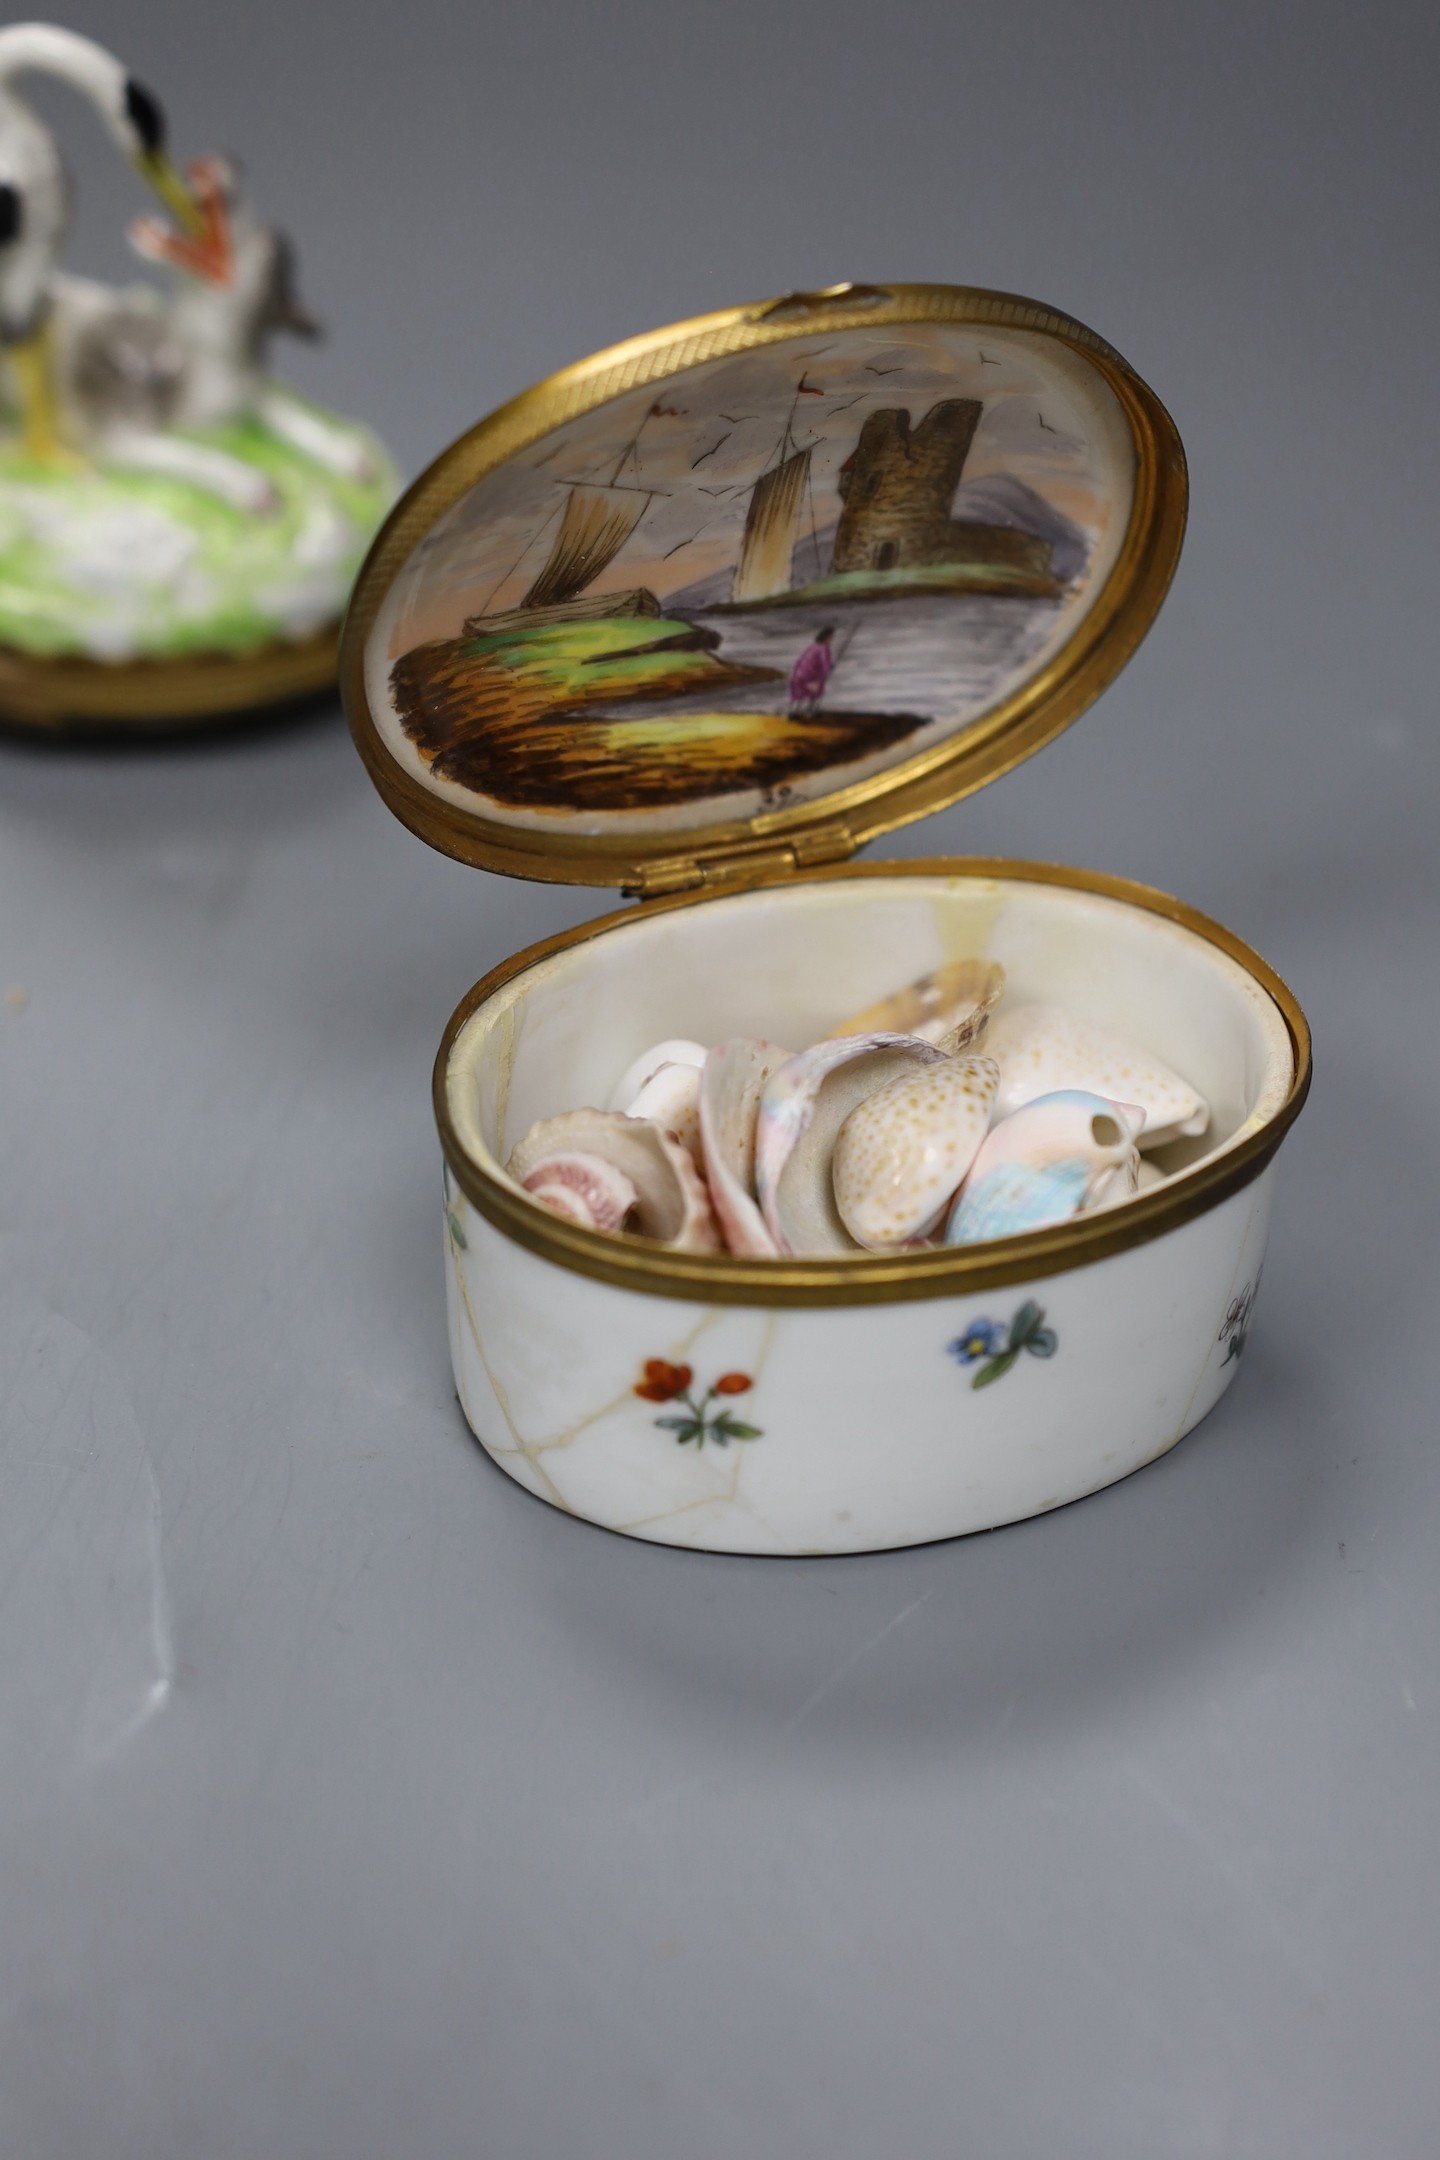 Two Continental porcelain snuff boxes circa 1900, one a novelty Aesop fable design, height 9cms